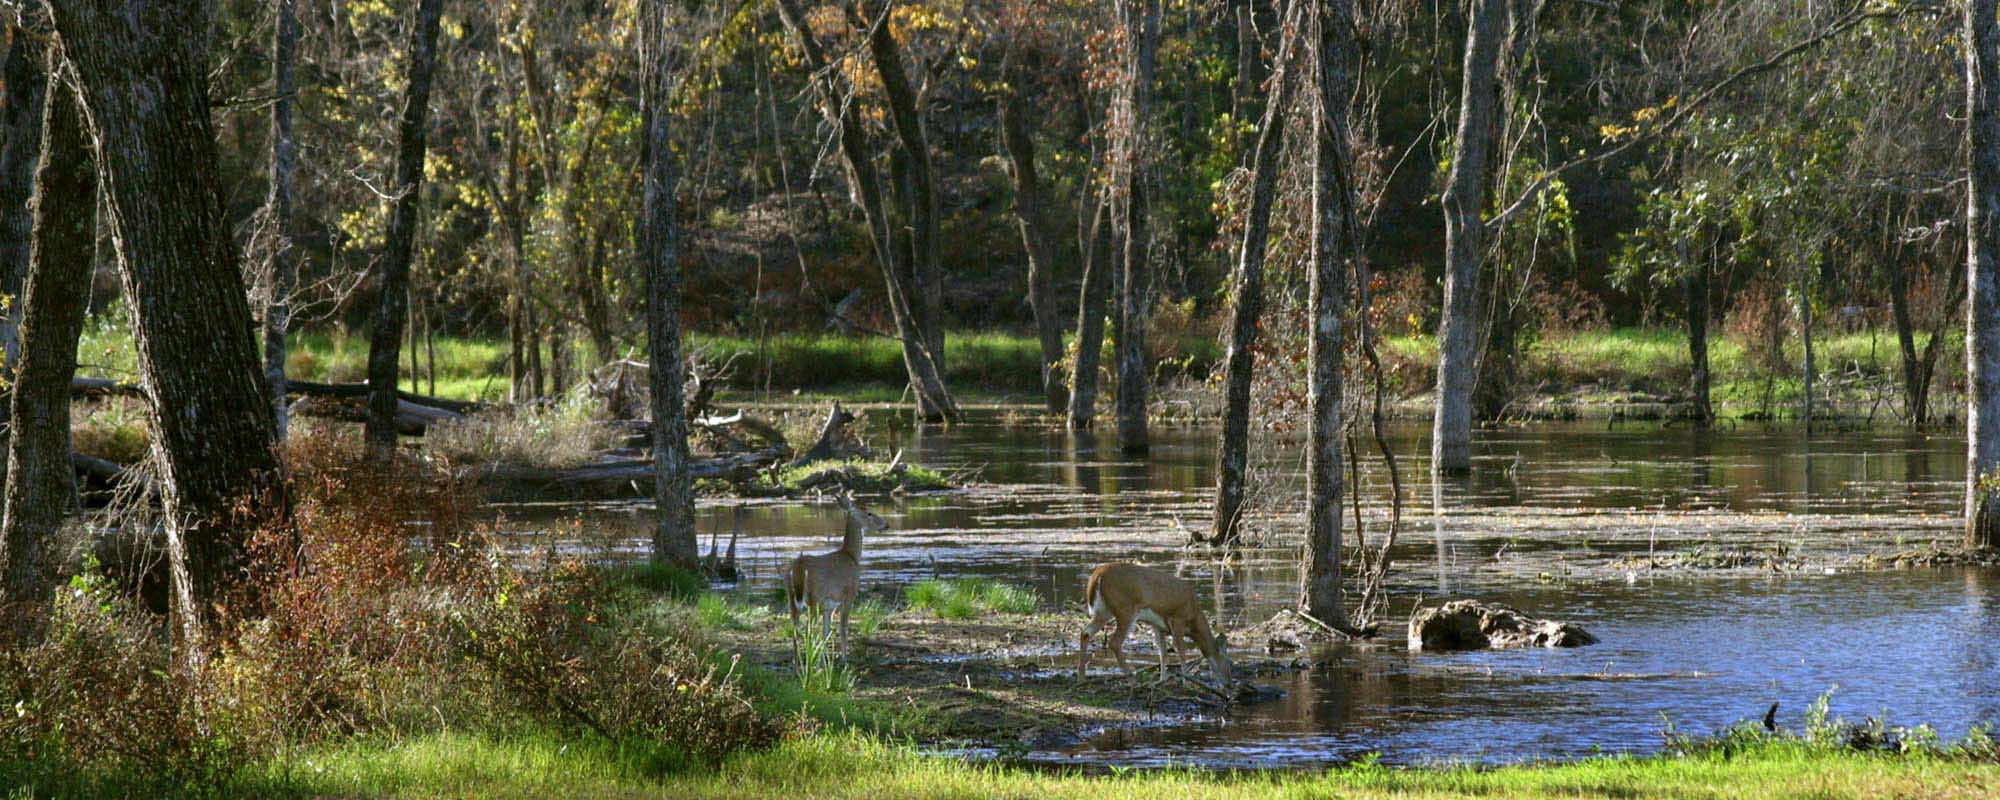 Deer drinking water from a lake in a marshy wooded area.